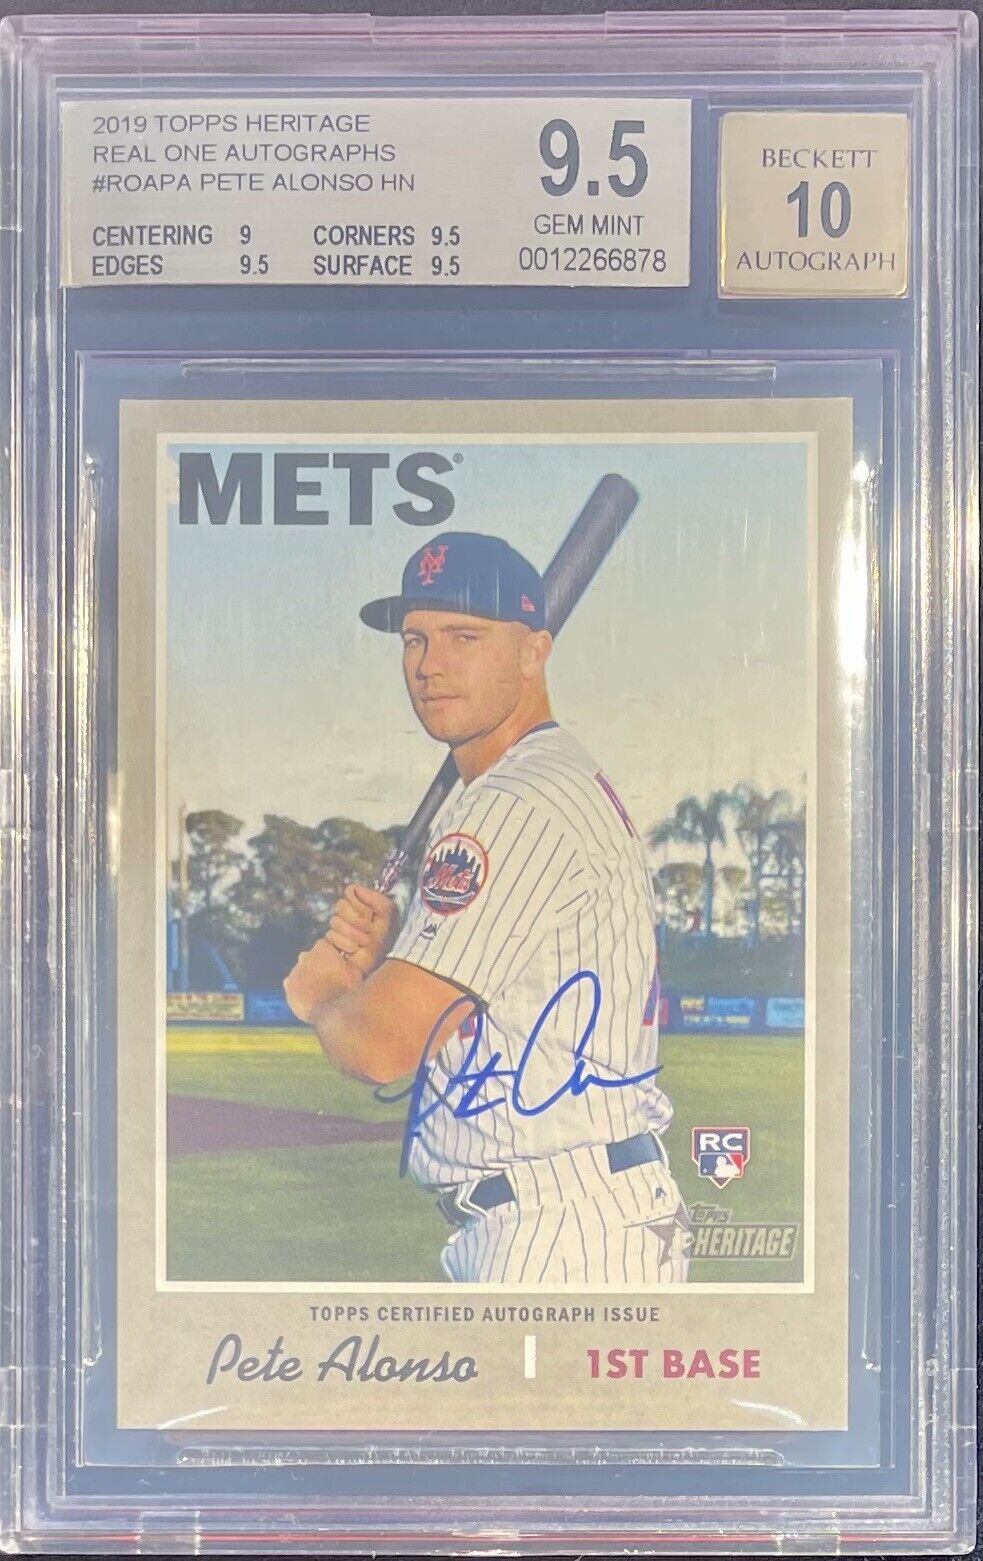 2019 TOPPS Heritage REAL-ONE AUTOGRAPHS PETE ALONSO BGS 9.5 HN